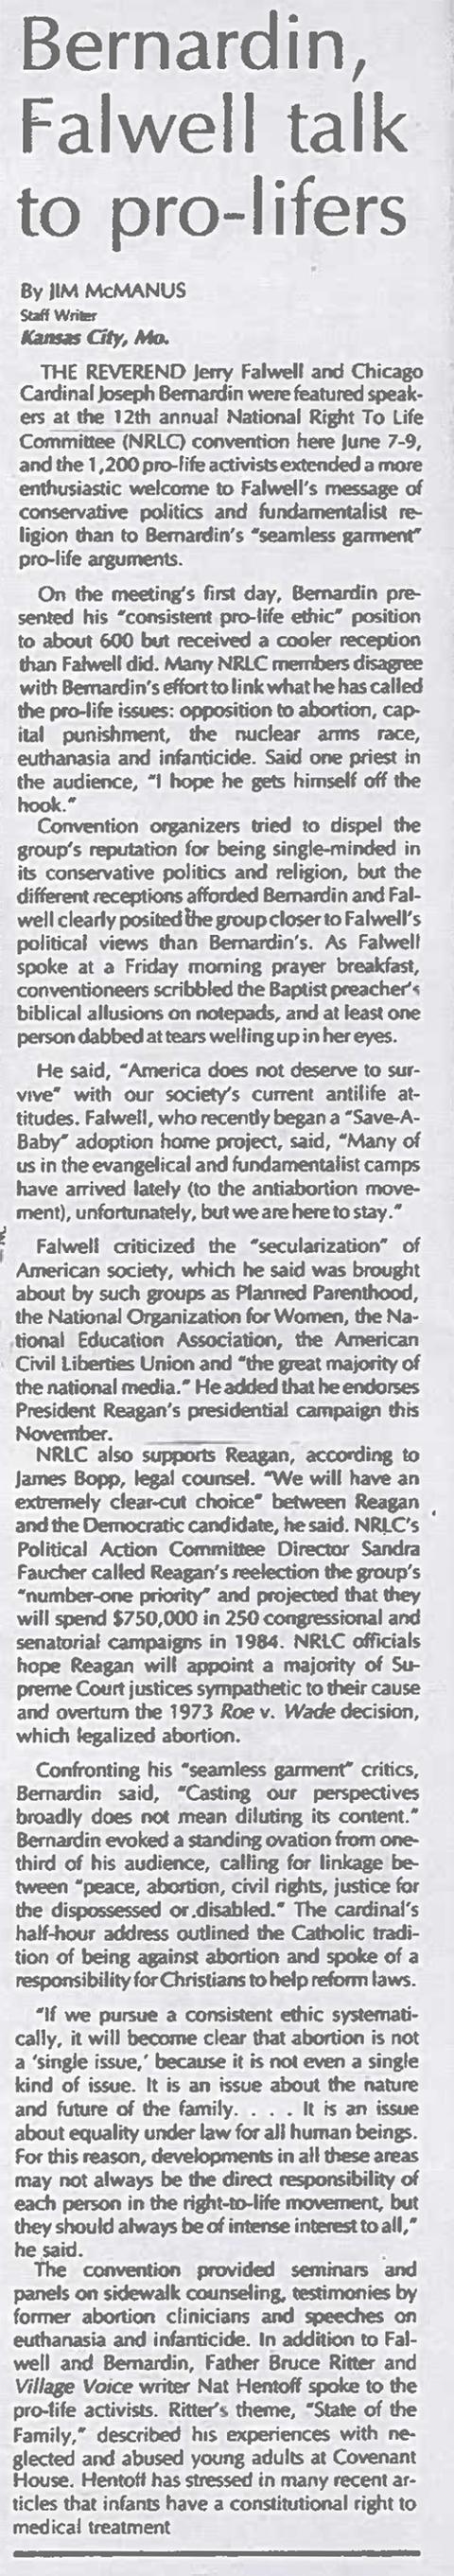 Digital scan of "Bernardin, Falwell talk to pro-lifers," on Page 10 of the NCR print issue dated June 22, 1984 (NCR archives)